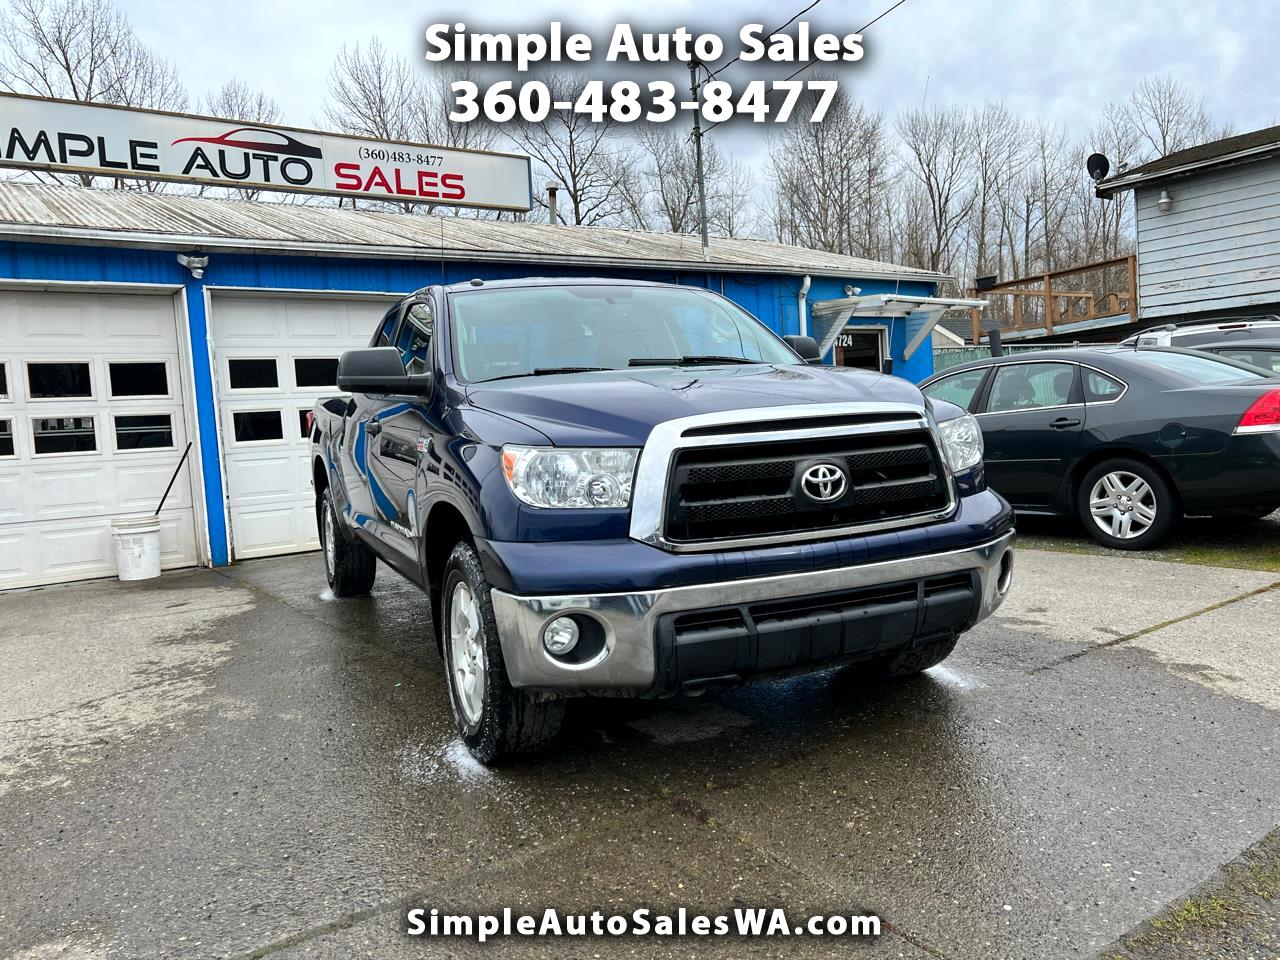 "Victory Motors of Colorado has a 2013 Toyota Tundra Grade available for sale."